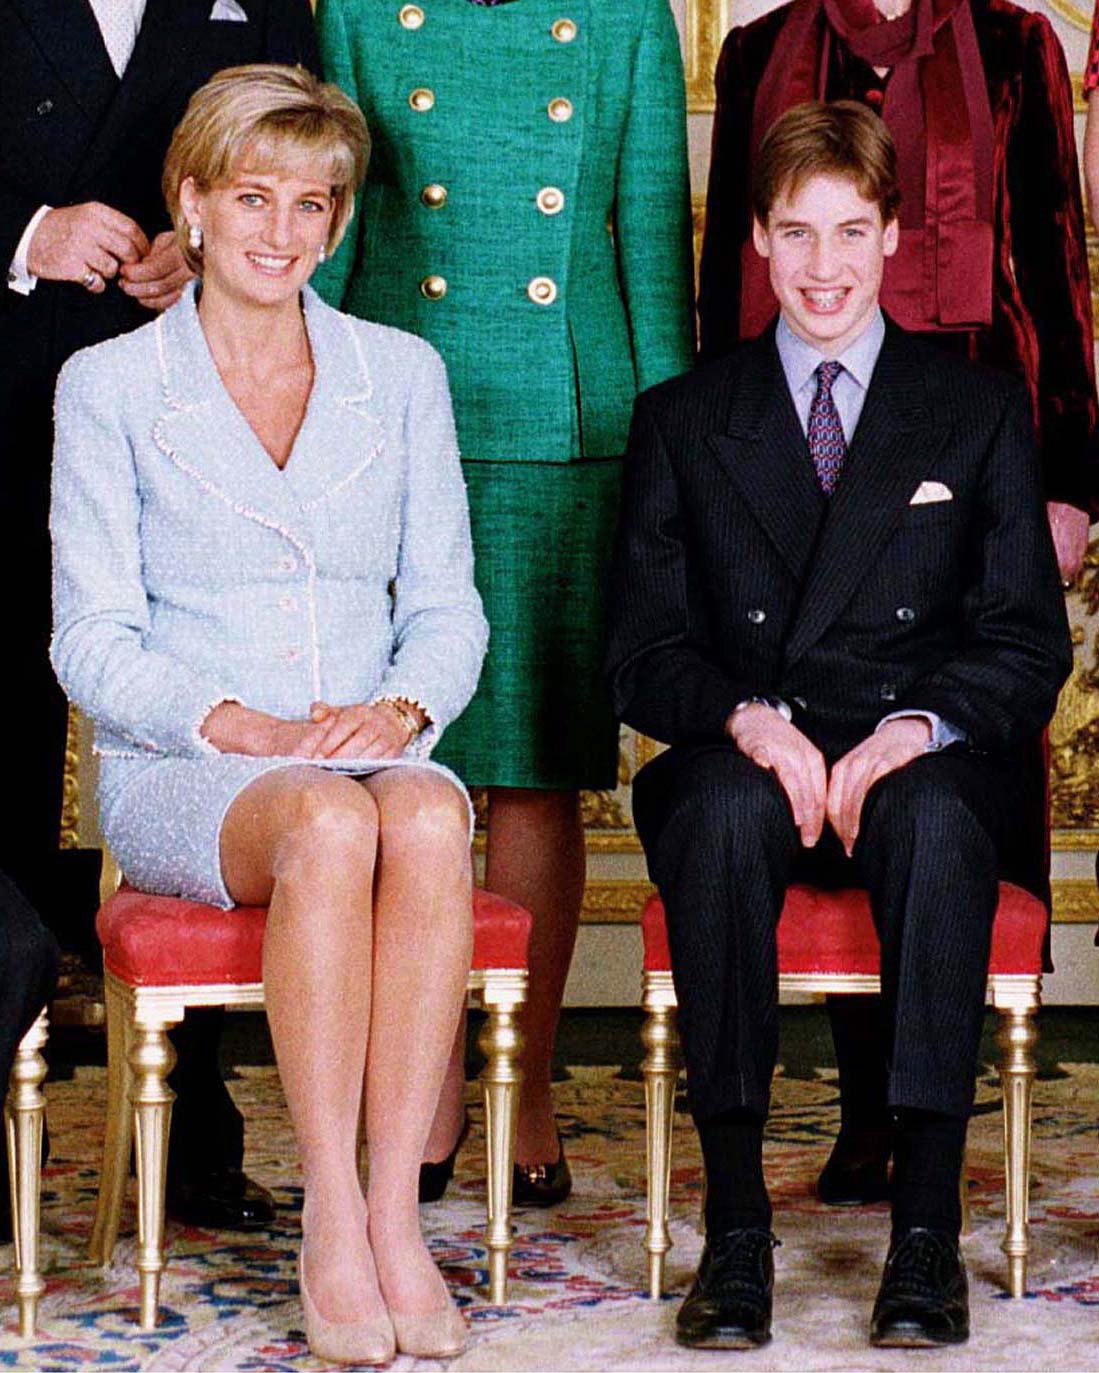 Prince William At Confirmation With Prince Charles And Princess Diana At Windsor Castle. | Source: Getty Images 